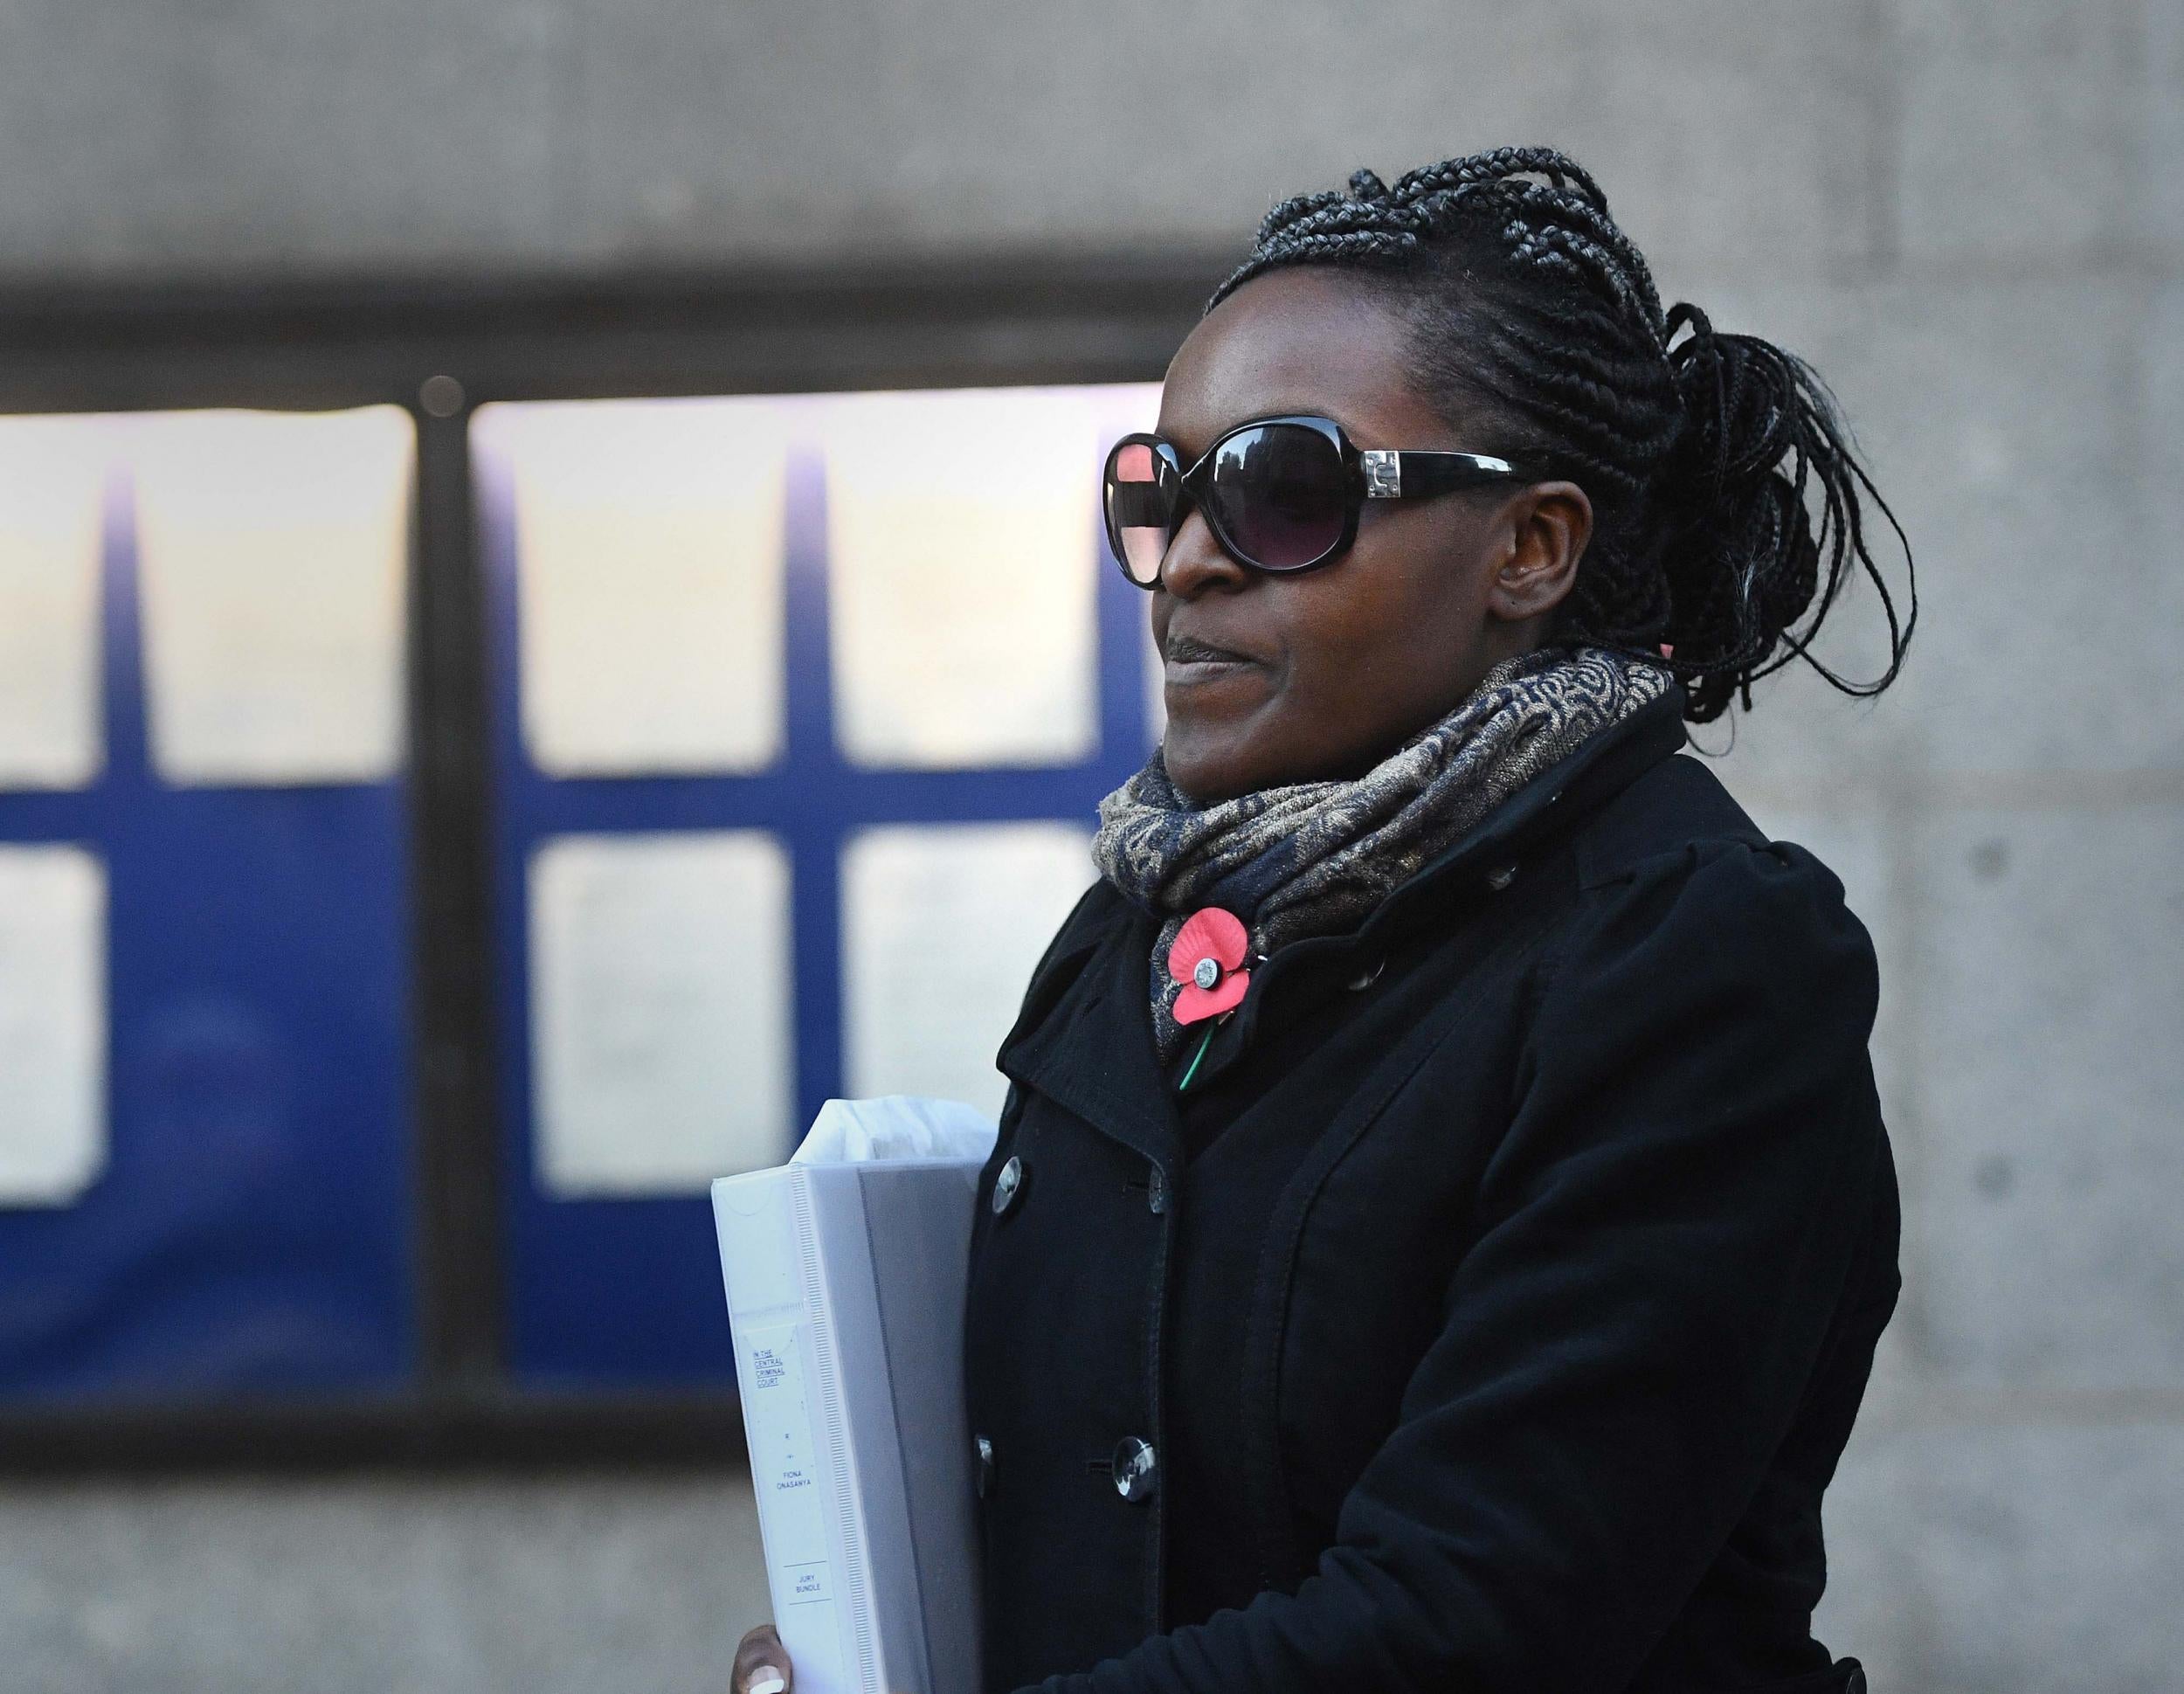 MP Fiona Onasanya denies one charge of perverting the course of justice